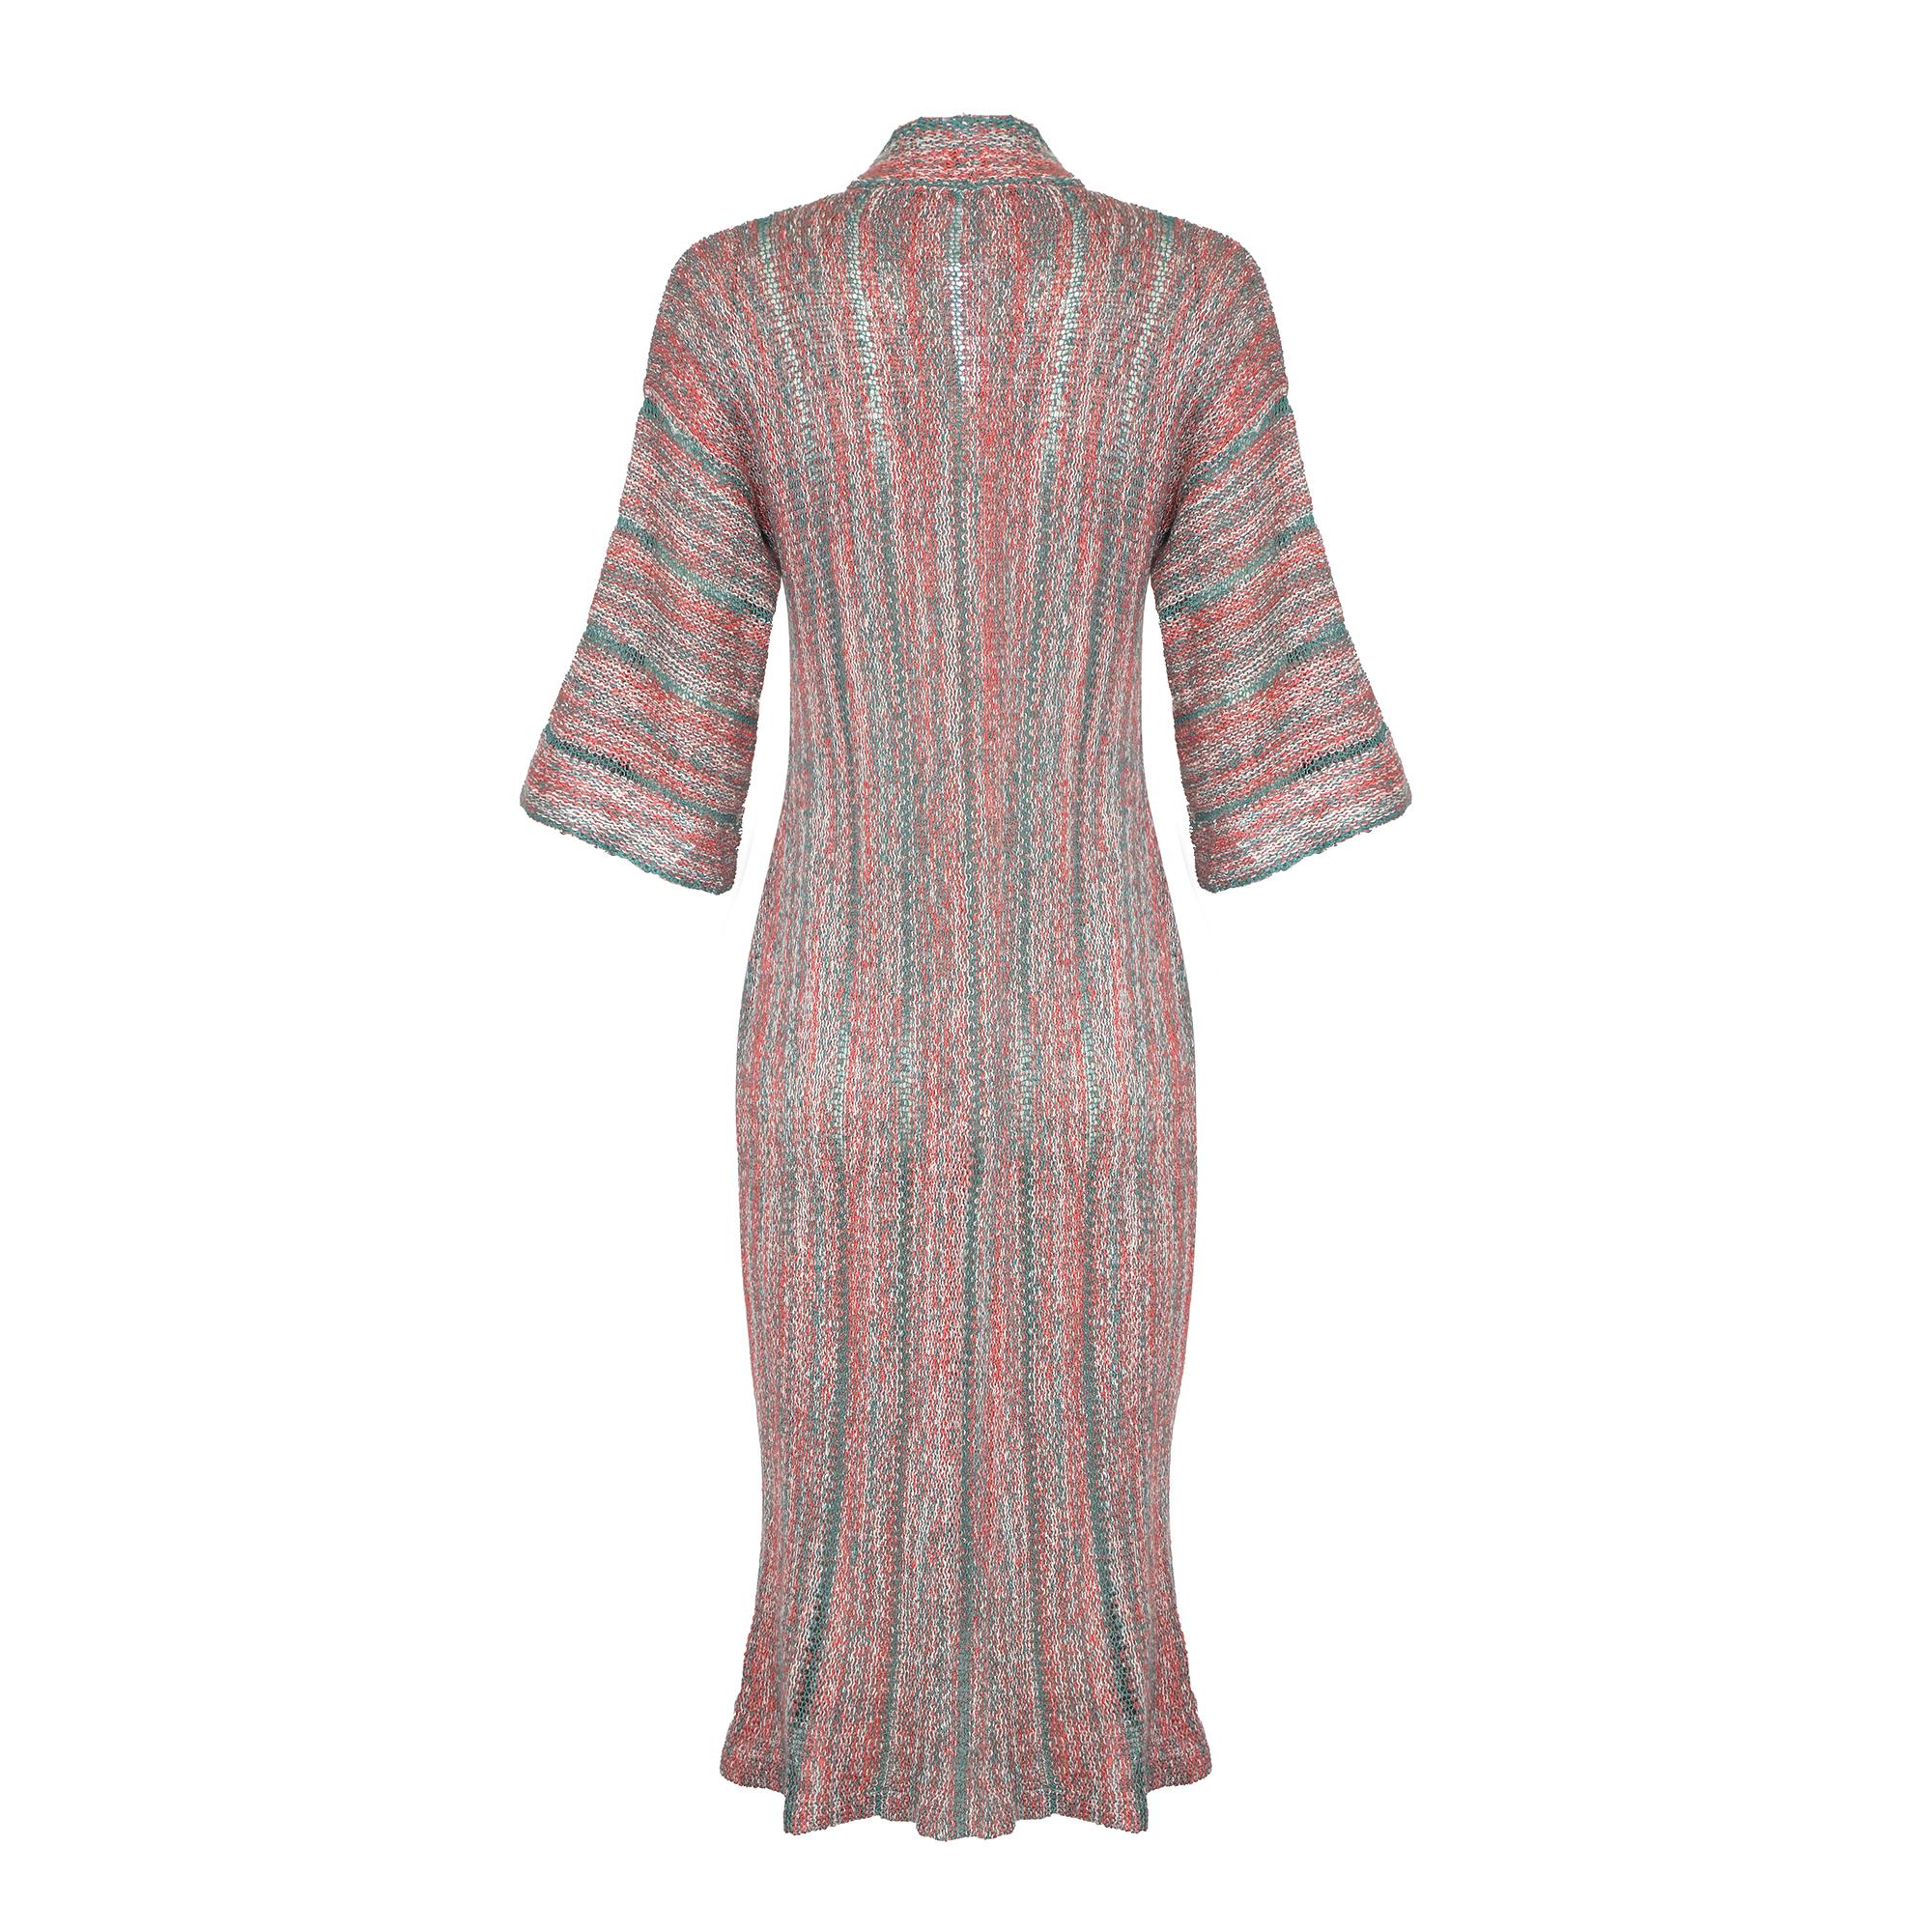 A 1970s Mary Farrin knitted dress. This is a really versatile piece from renowned British knitwear designer Mary Farrin in a wonderful combination of deep sea foam green, coral pink and white wool acrylic. The style is gently fitted and this dress